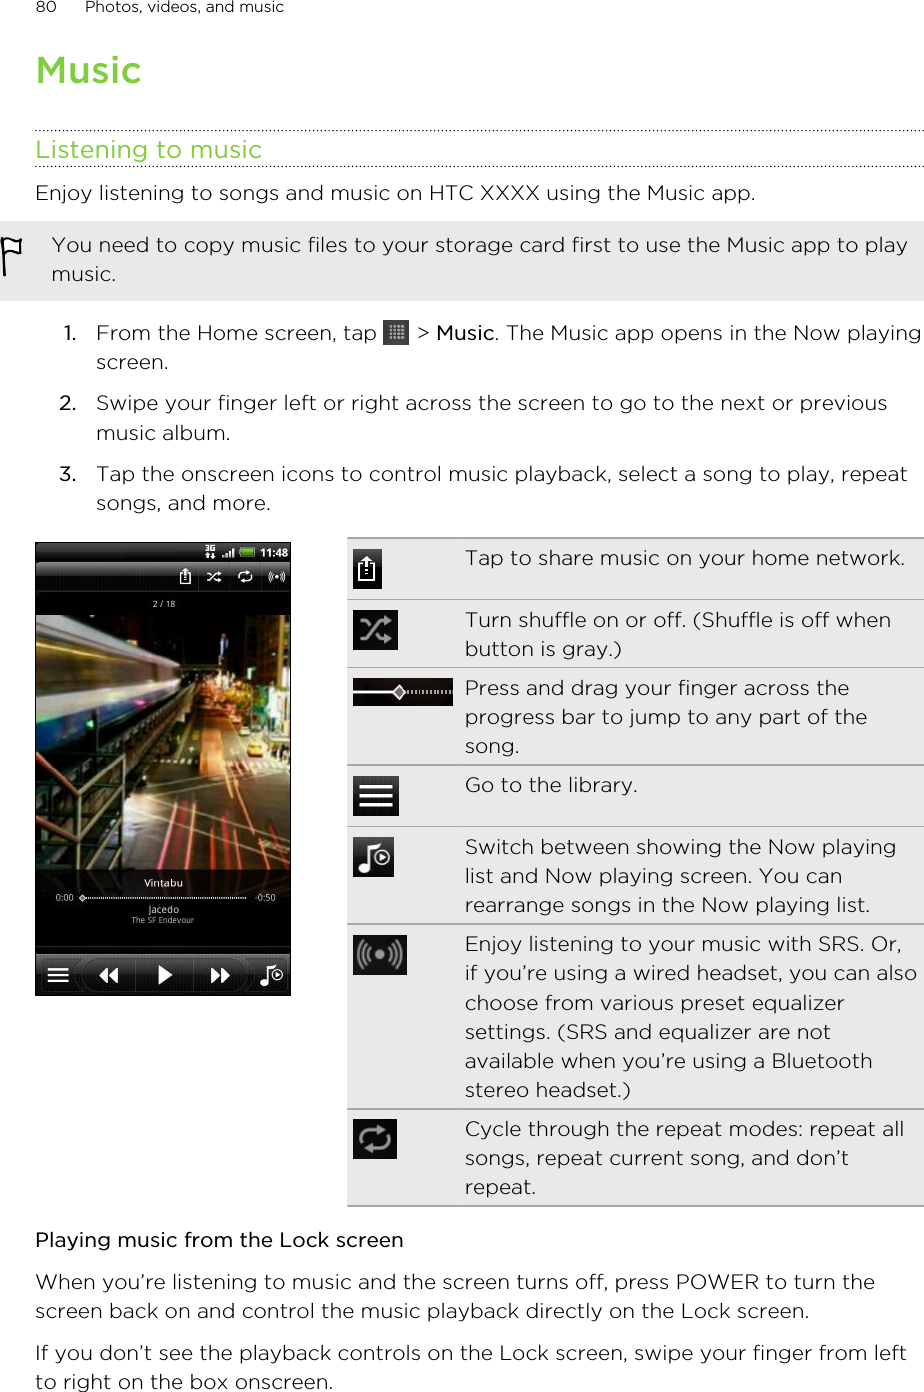 MusicListening to musicEnjoy listening to songs and music on HTC XXXX using the Music app.You need to copy music files to your storage card first to use the Music app to playmusic.1. From the Home screen, tap   &gt; Music. The Music app opens in the Now playingscreen.2. Swipe your finger left or right across the screen to go to the next or previousmusic album.3. Tap the onscreen icons to control music playback, select a song to play, repeatsongs, and more.Tap to share music on your home network.Turn shuffle on or off. (Shuffle is off whenbutton is gray.)Press and drag your finger across theprogress bar to jump to any part of thesong.Go to the library.Switch between showing the Now playinglist and Now playing screen. You canrearrange songs in the Now playing list.Enjoy listening to your music with SRS. Or,if you’re using a wired headset, you can alsochoose from various preset equalizersettings. (SRS and equalizer are notavailable when you’re using a Bluetoothstereo headset.)Cycle through the repeat modes: repeat allsongs, repeat current song, and don’trepeat.Playing music from the Lock screenWhen you’re listening to music and the screen turns off, press POWER to turn thescreen back on and control the music playback directly on the Lock screen.If you don’t see the playback controls on the Lock screen, swipe your finger from leftto right on the box onscreen.80 Photos, videos, and music